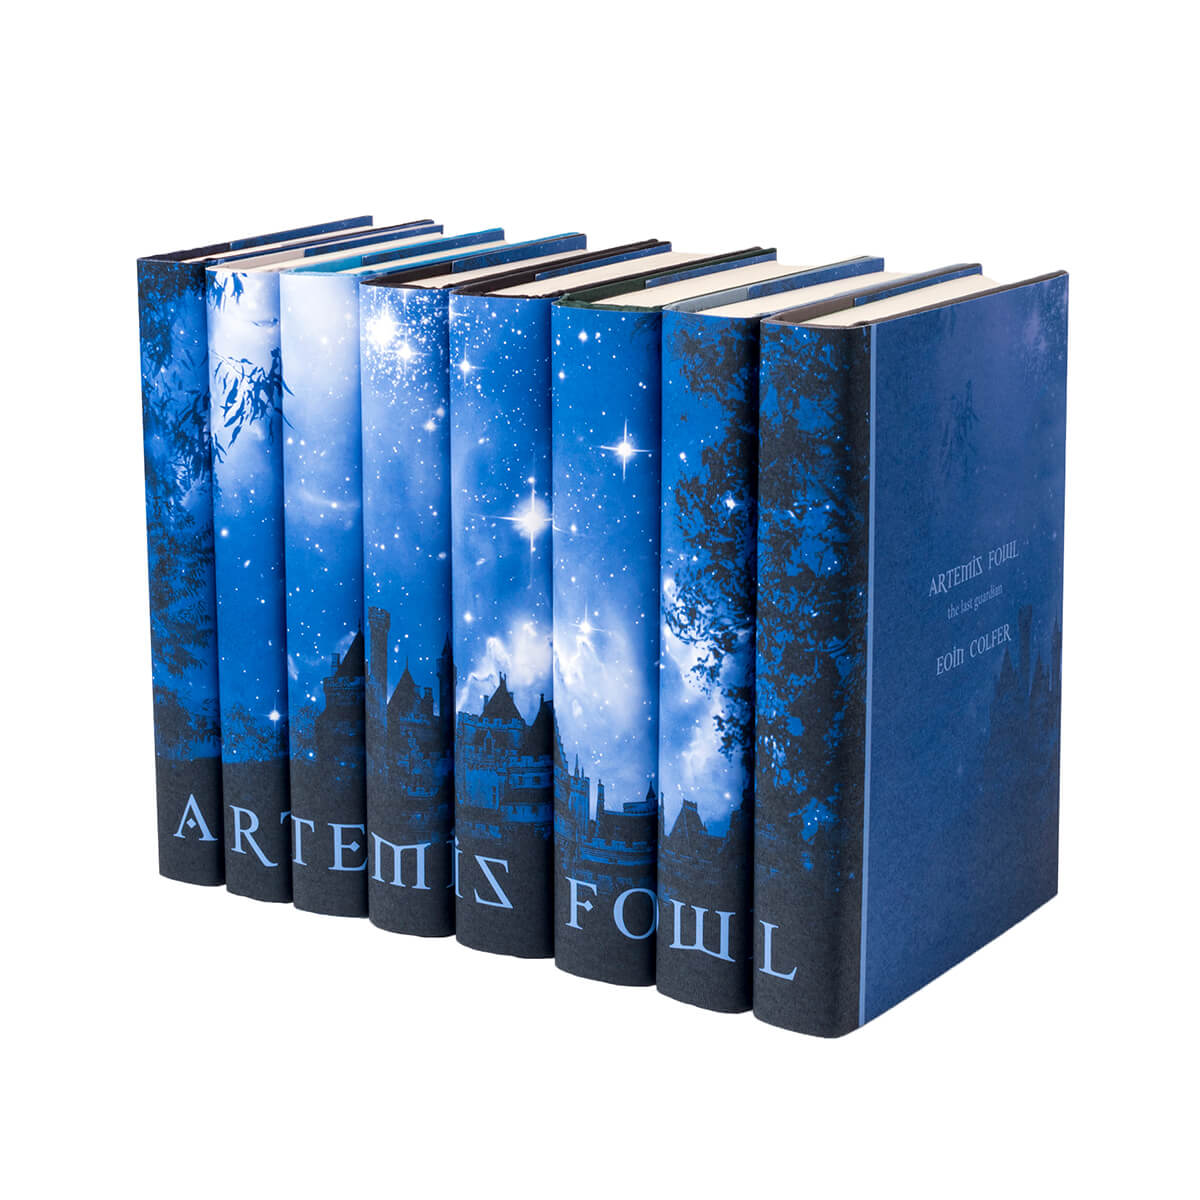 Artemis Fowl Series 8 Books Collection Set - Eoin Colfer